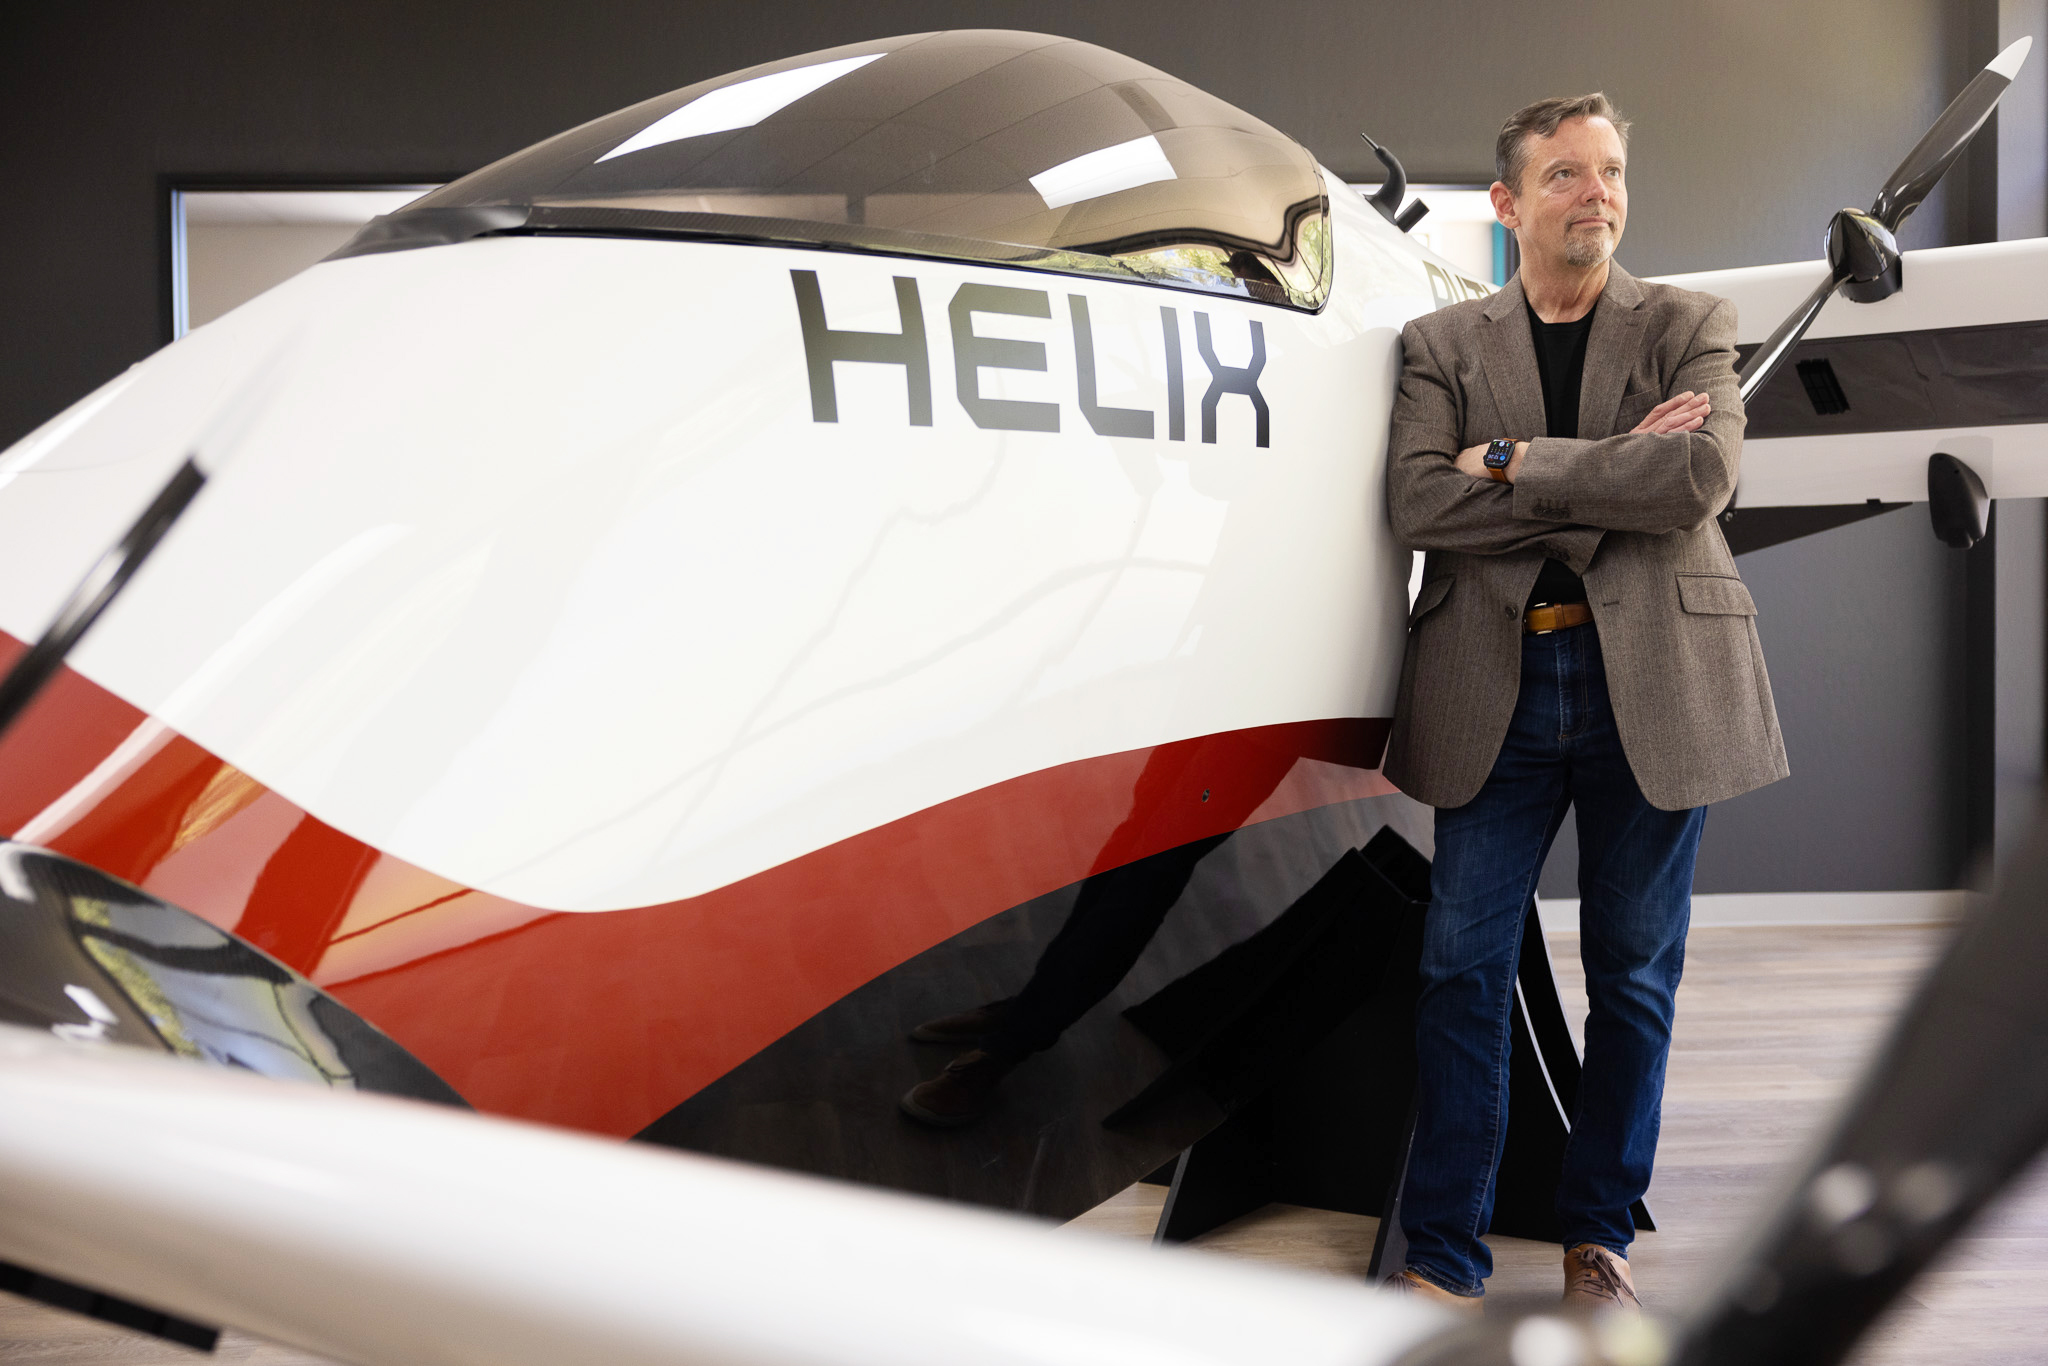 A man in a blazer and jeans stands with arms crossed next to a sleek, futuristic vehicle labeled &quot;HELIX,&quot; which has a glossy white and red exterior with a tinted canopy.